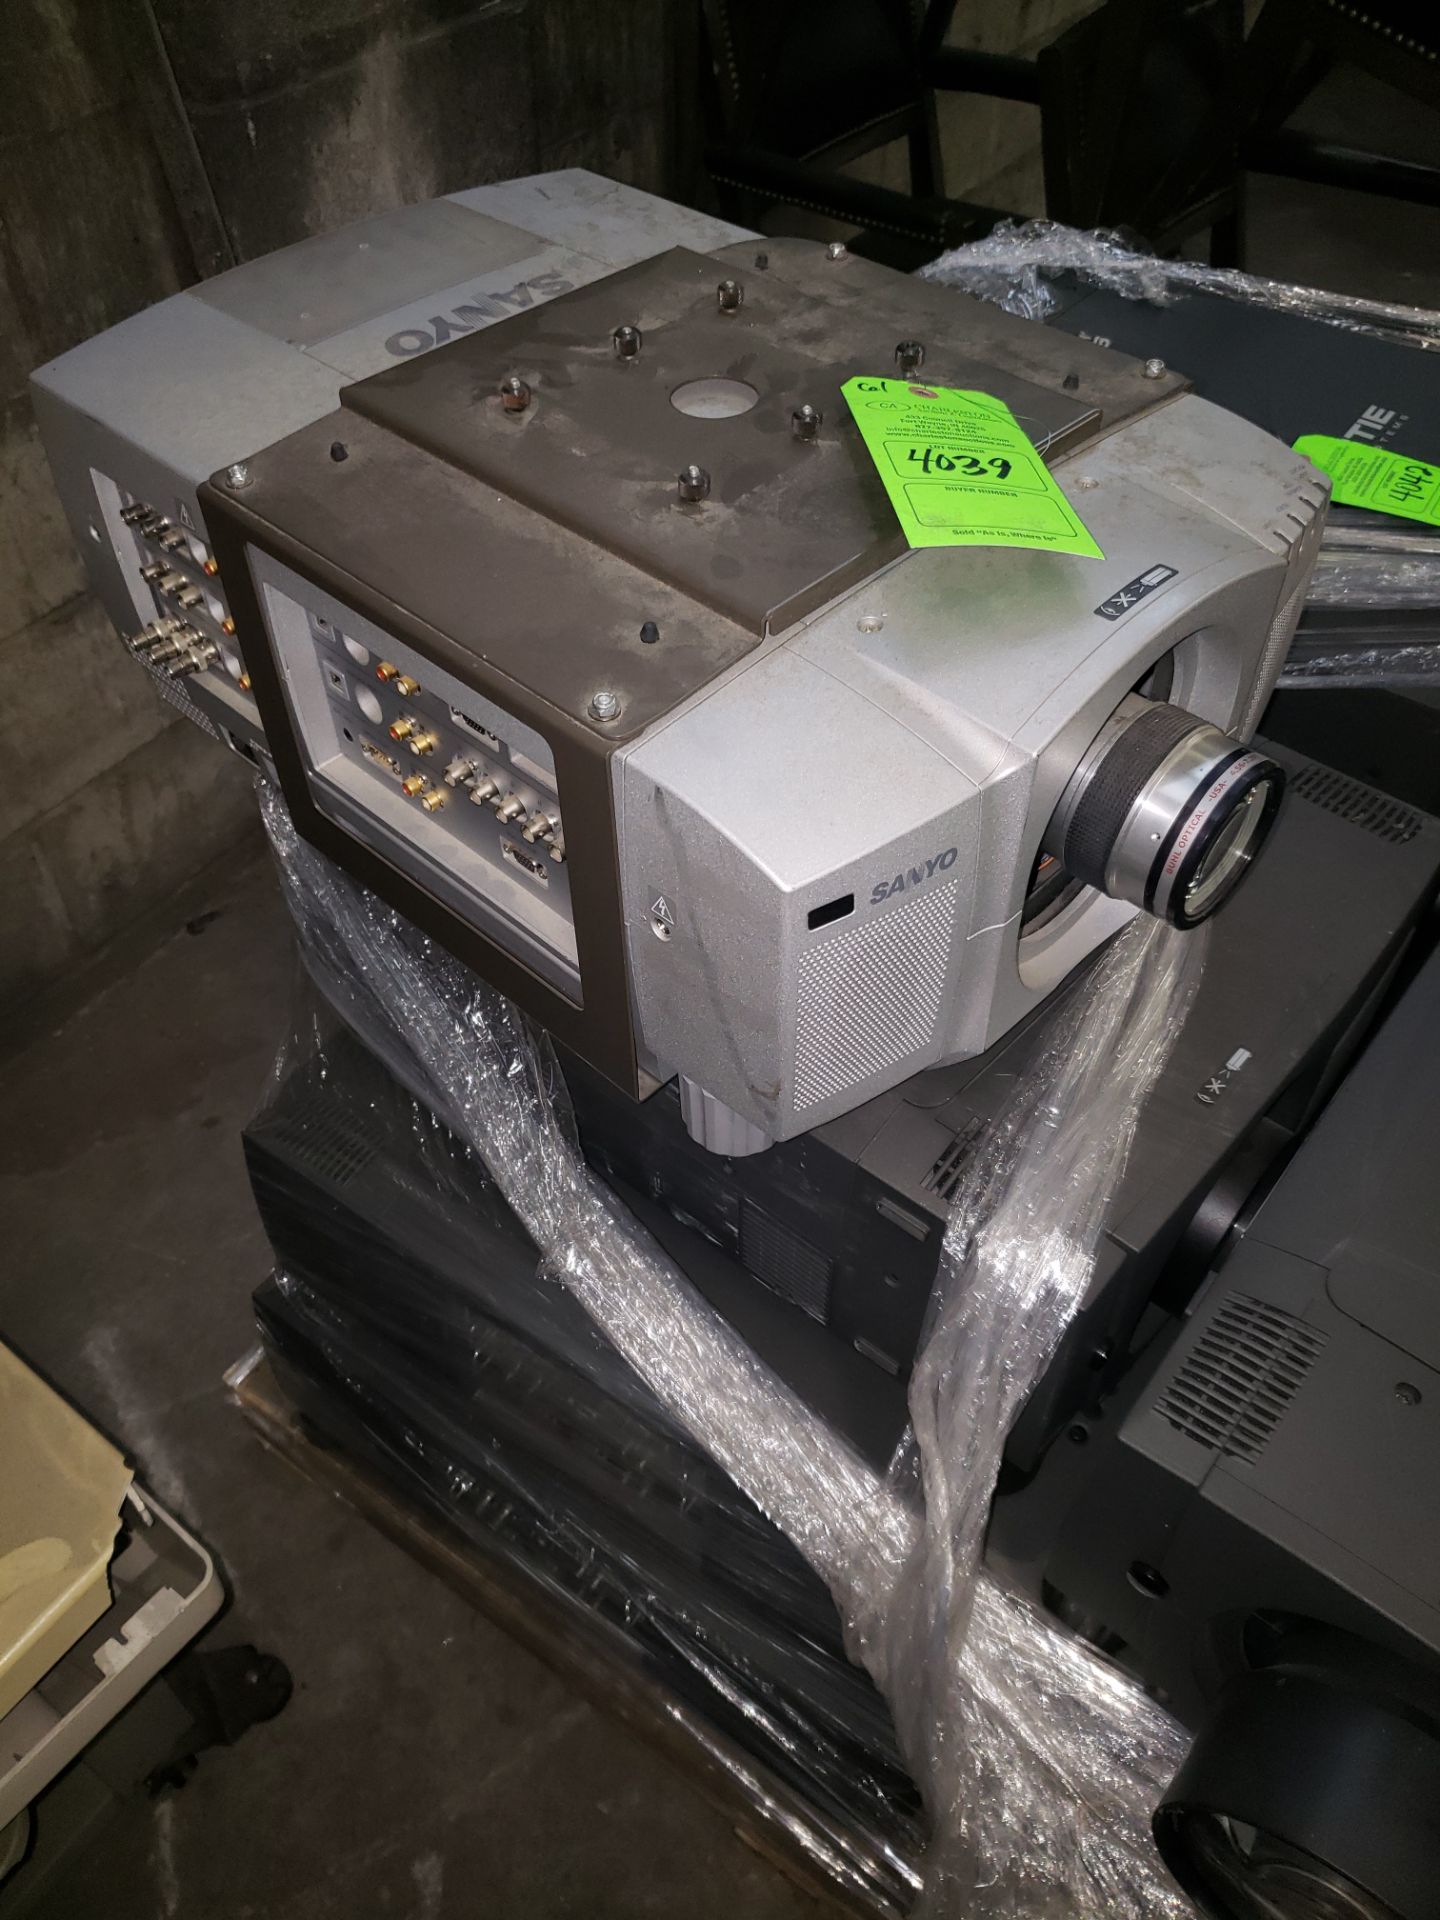 (3) SANYO PROJECTOR (1) SANYO PROJECTOR (LOCATED AT: 219 MURRAY STREET, FORT WAYNE, IN 46803)